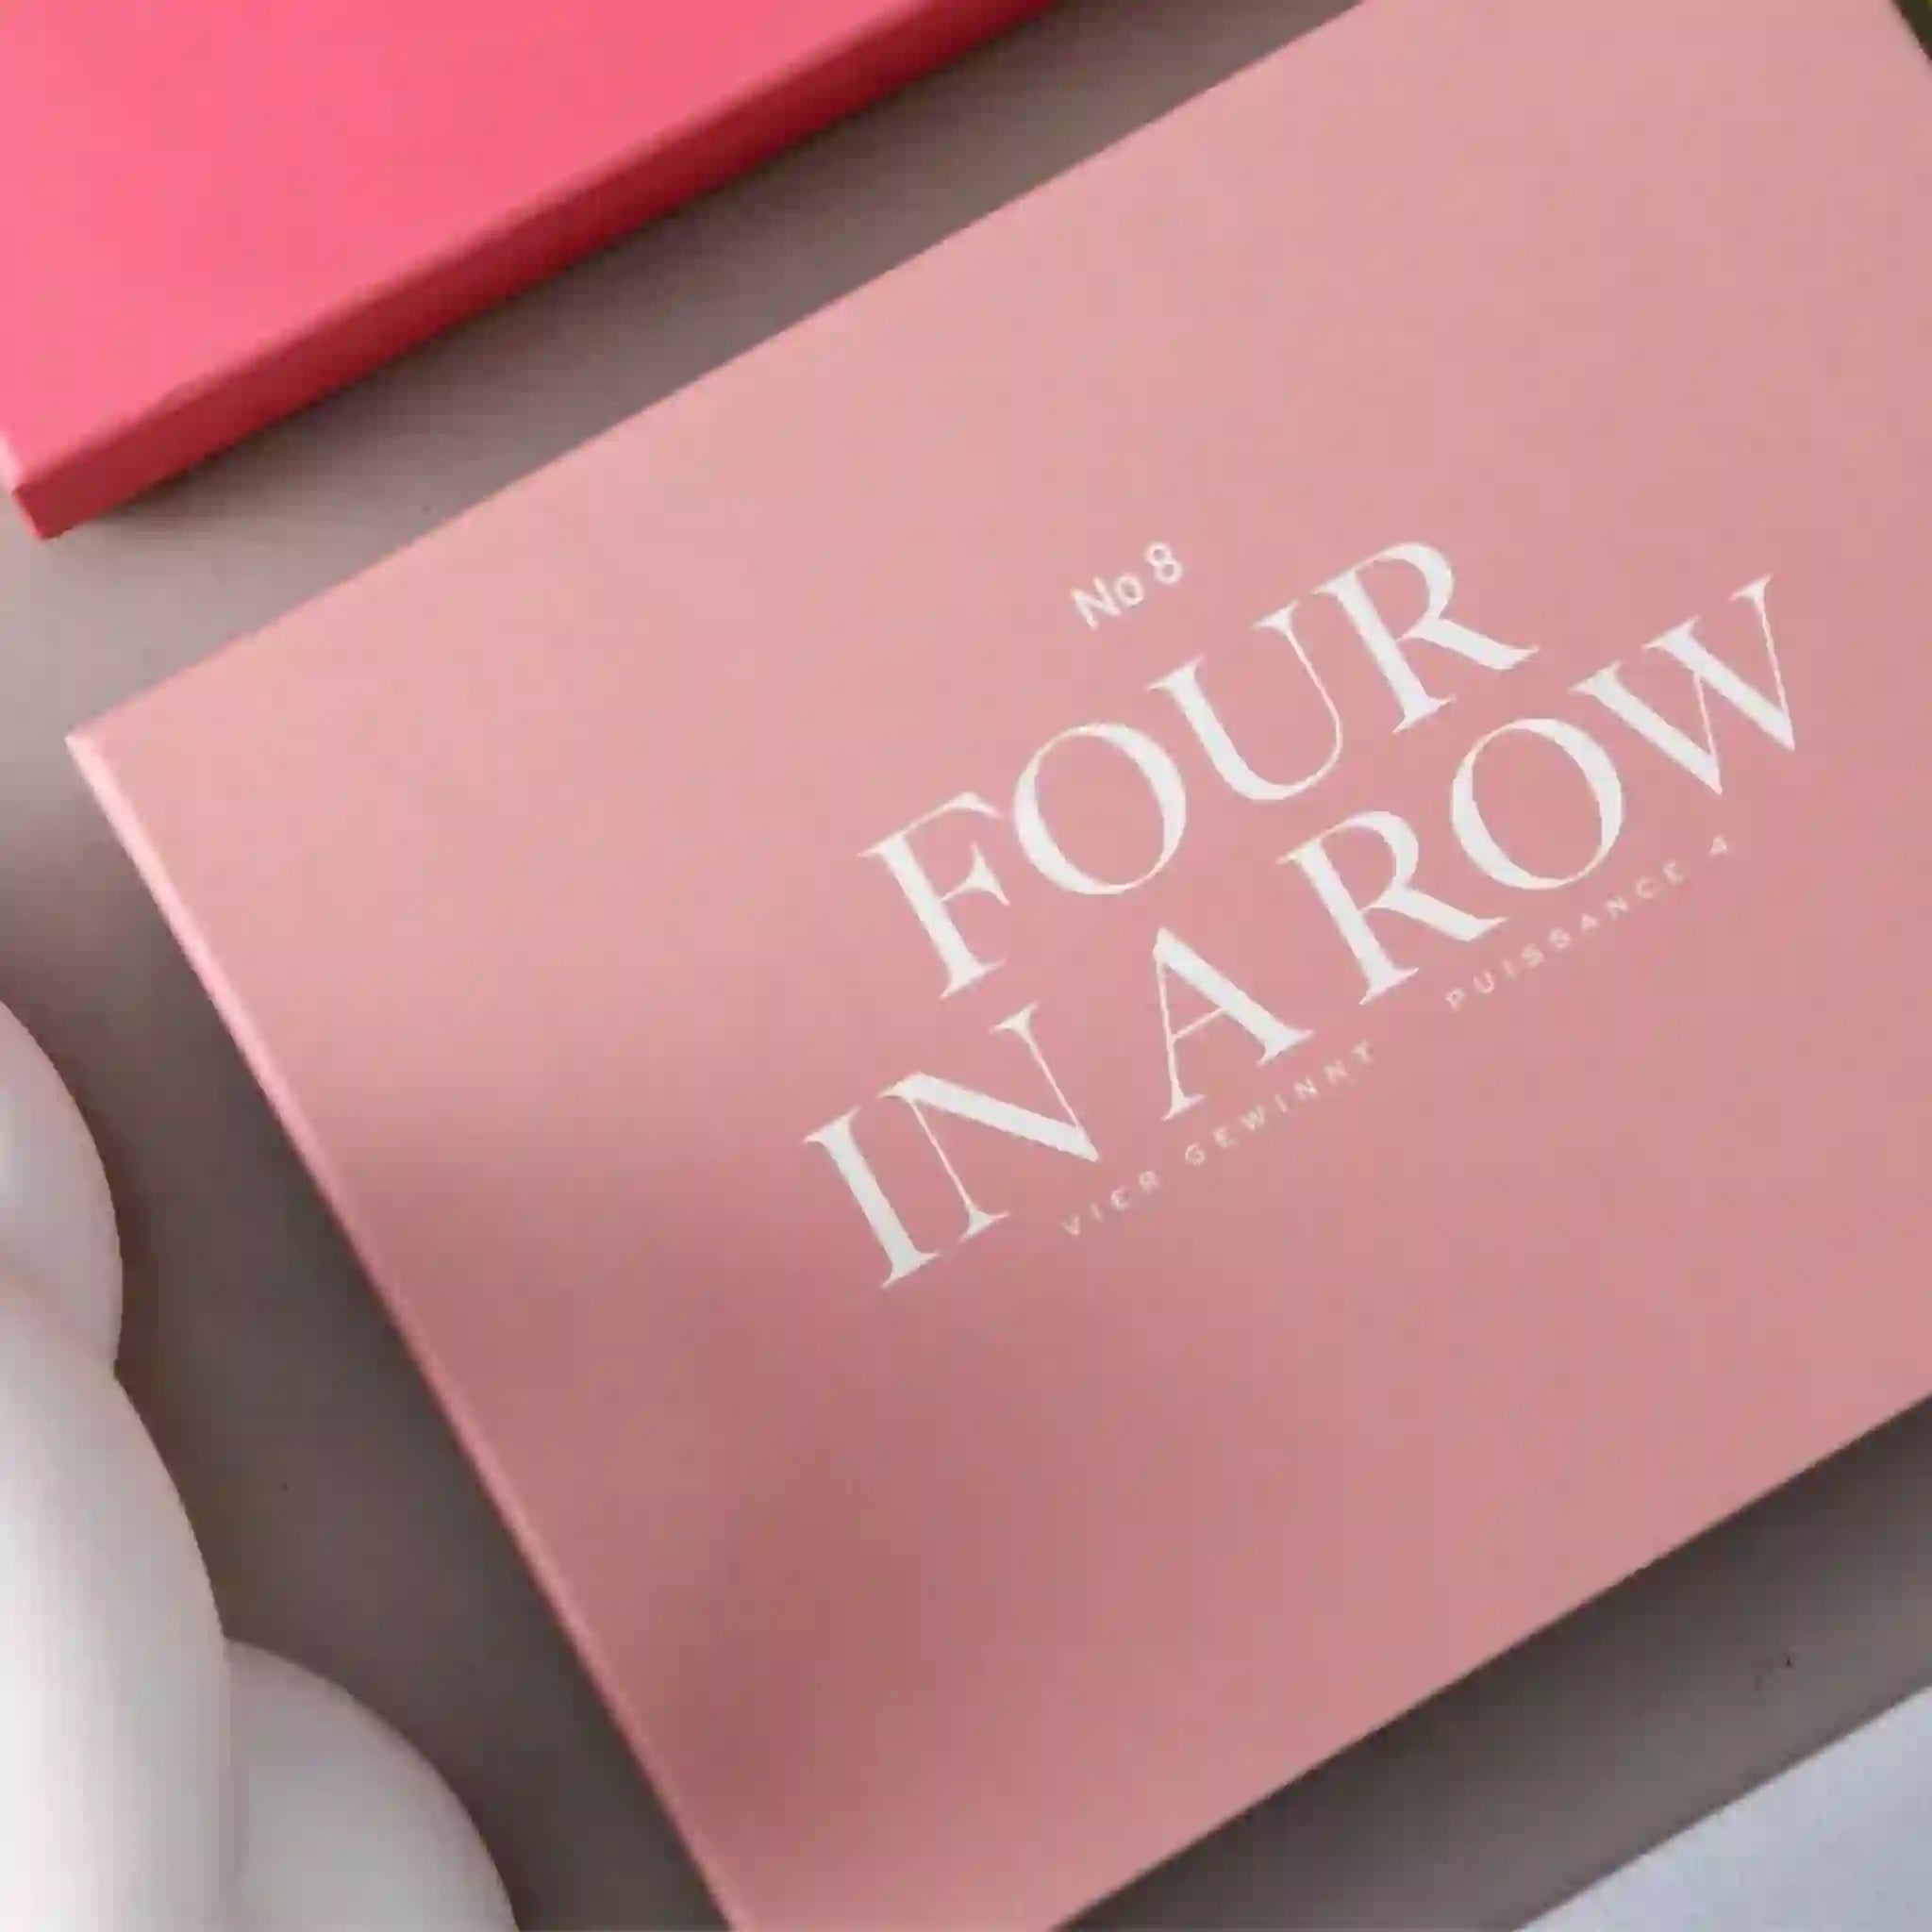 A pink box filled with a four in a row board game and white text that reads, "No 8 Four In A Row".